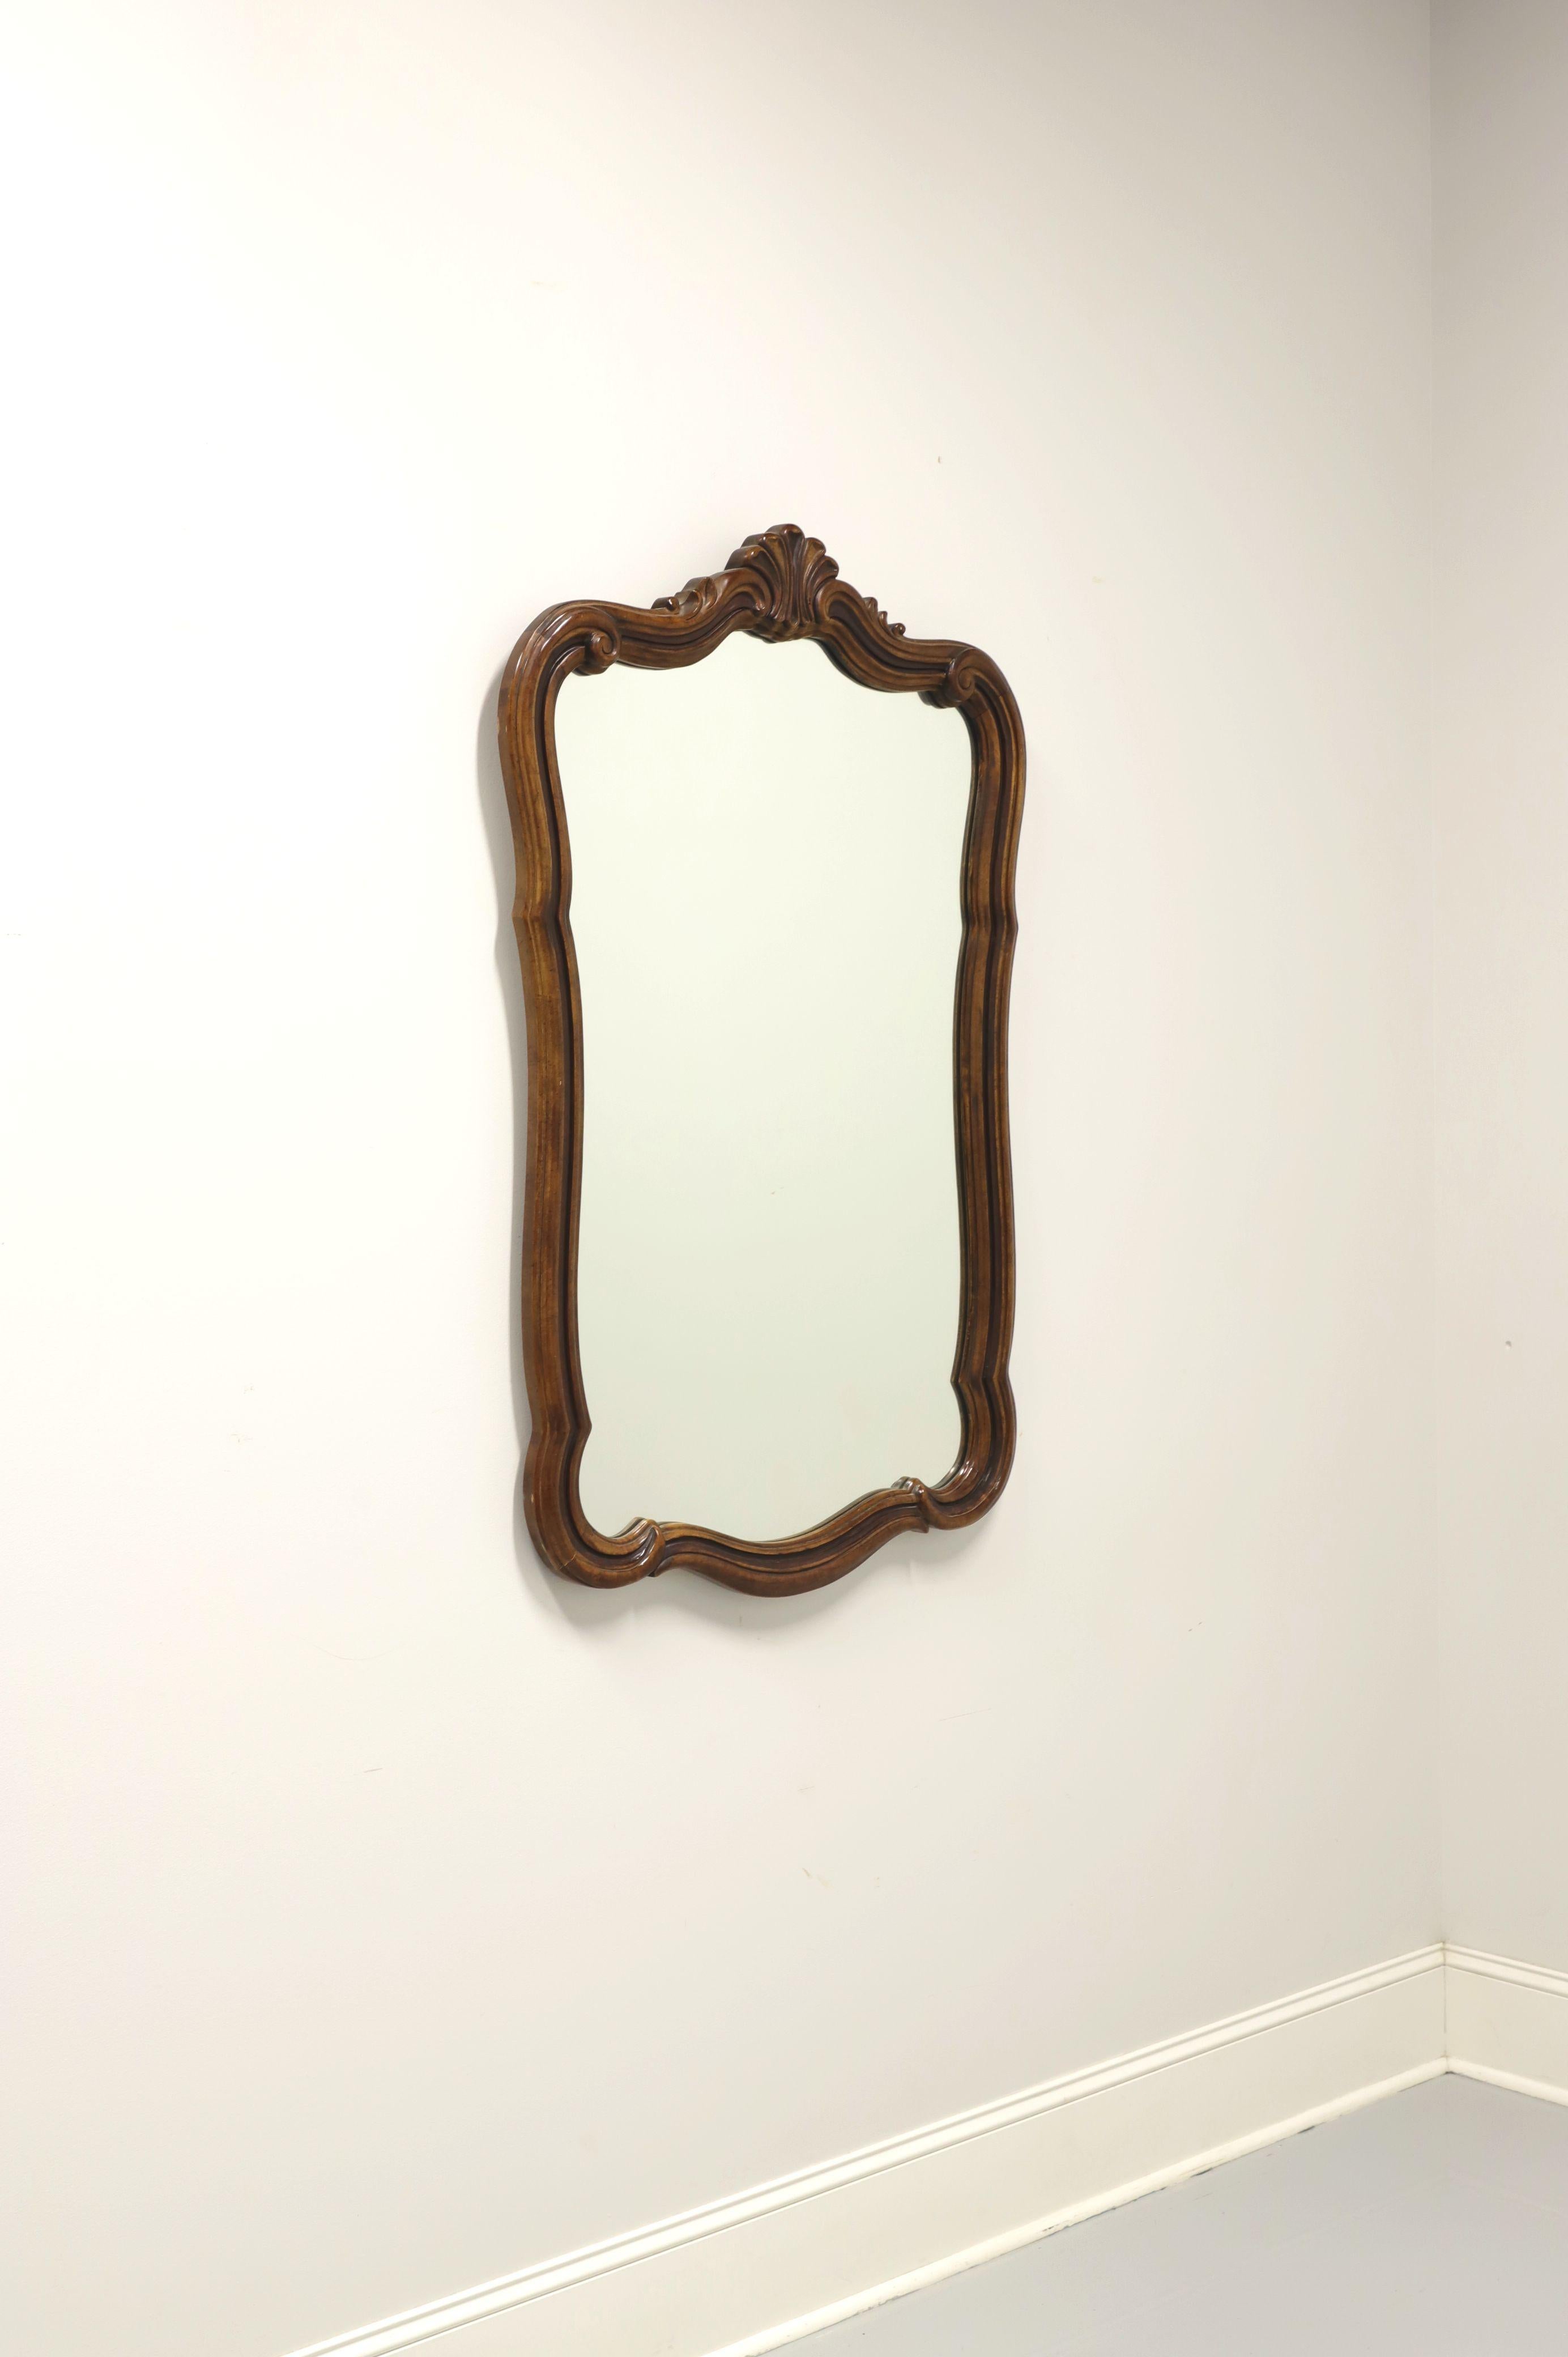 A French Country style wall mirror by Drexel Heritage, from their Grand Tour Collection. Mirror glass and slightly distressed walnut frame with decorative scroll design and carved fan to top. Made in North Carolina, USA, circa 1977. 

Style #: